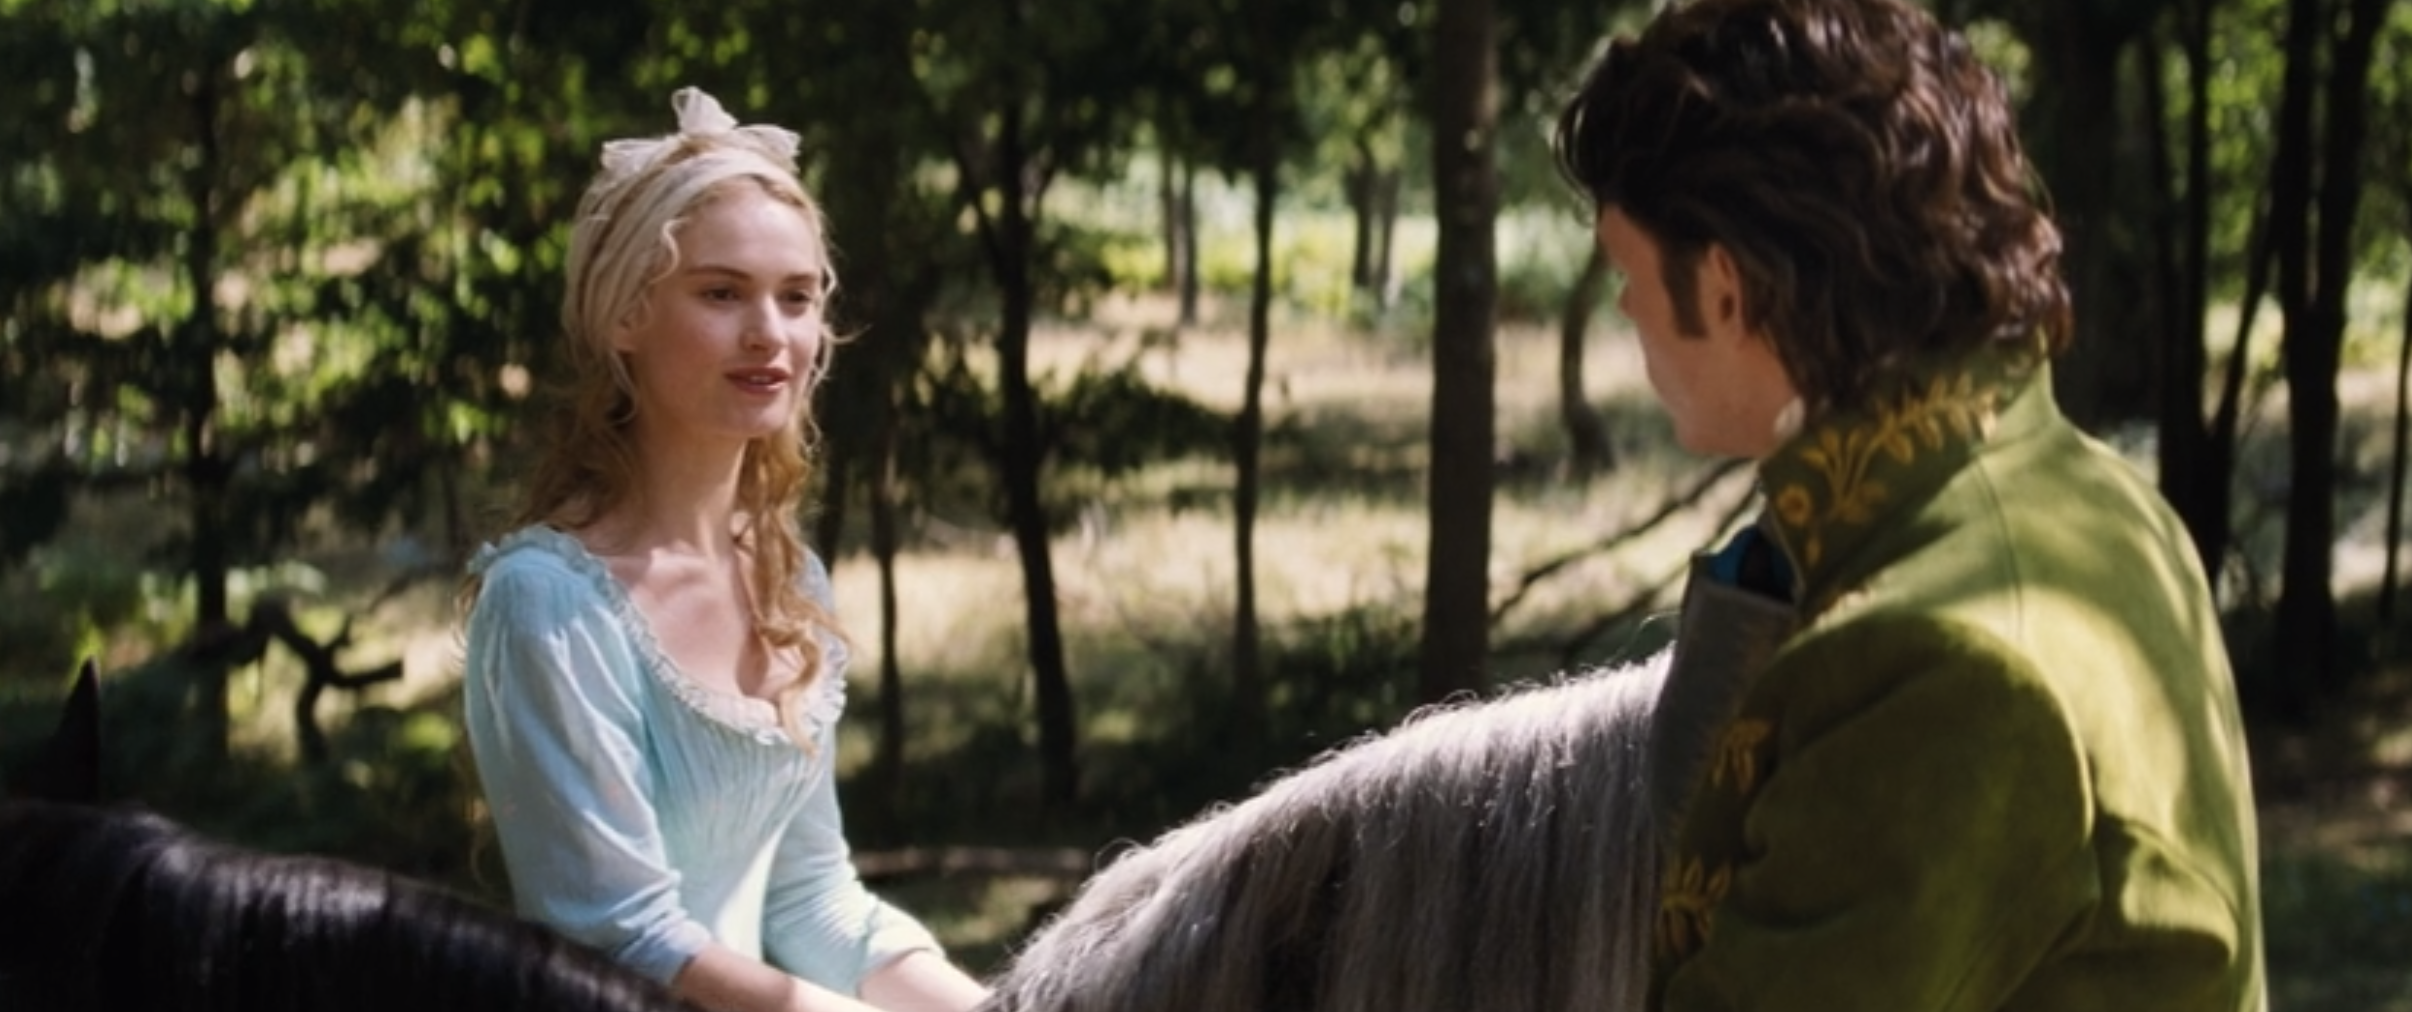 Lily James as Ella and Richard Madden as Kit crossing paths with each other on horseback in the live-action &quot;Cinderella&quot;